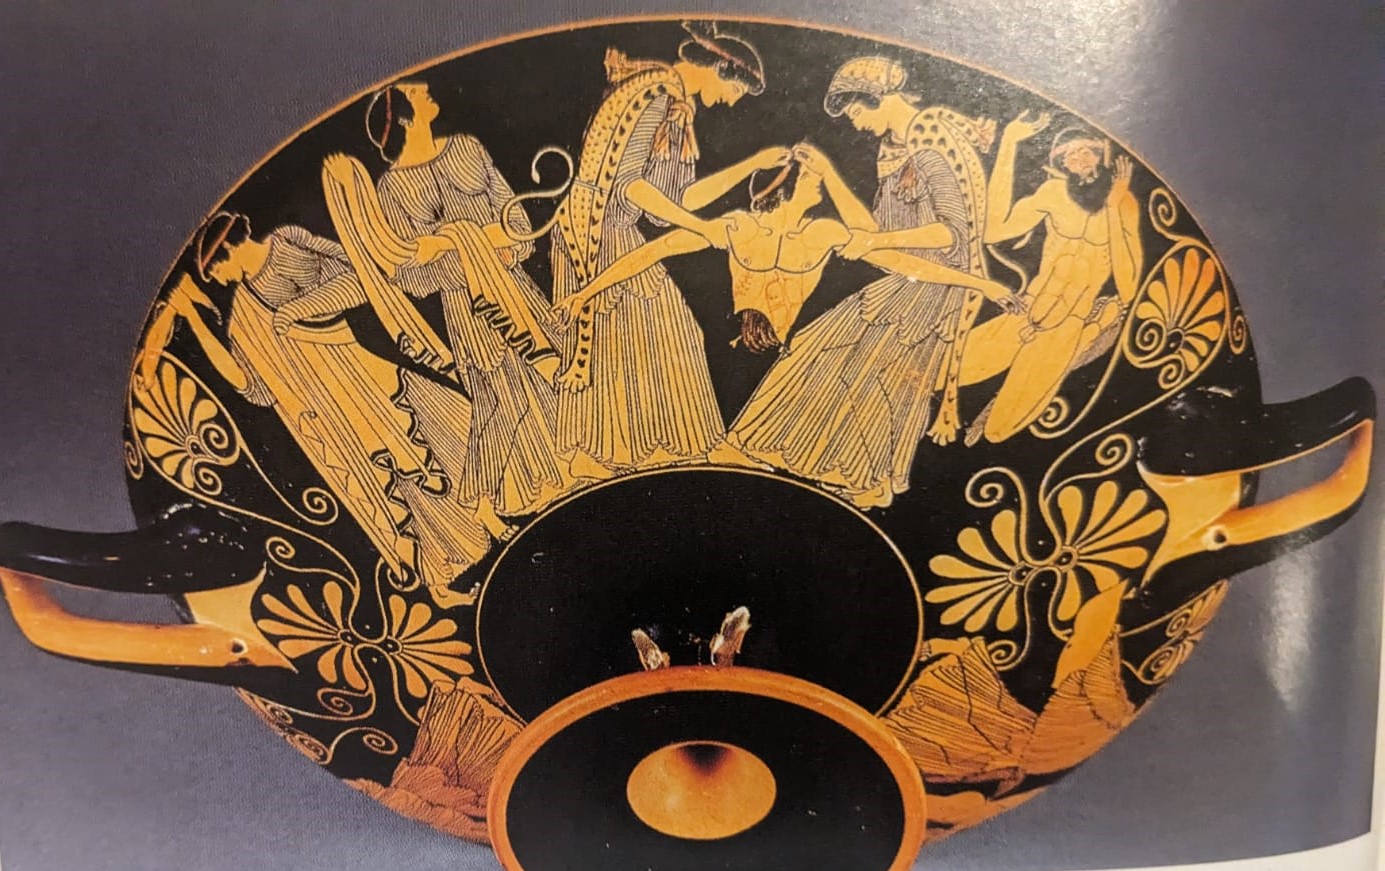 <p>When was the death of pentheus vase created?</p>